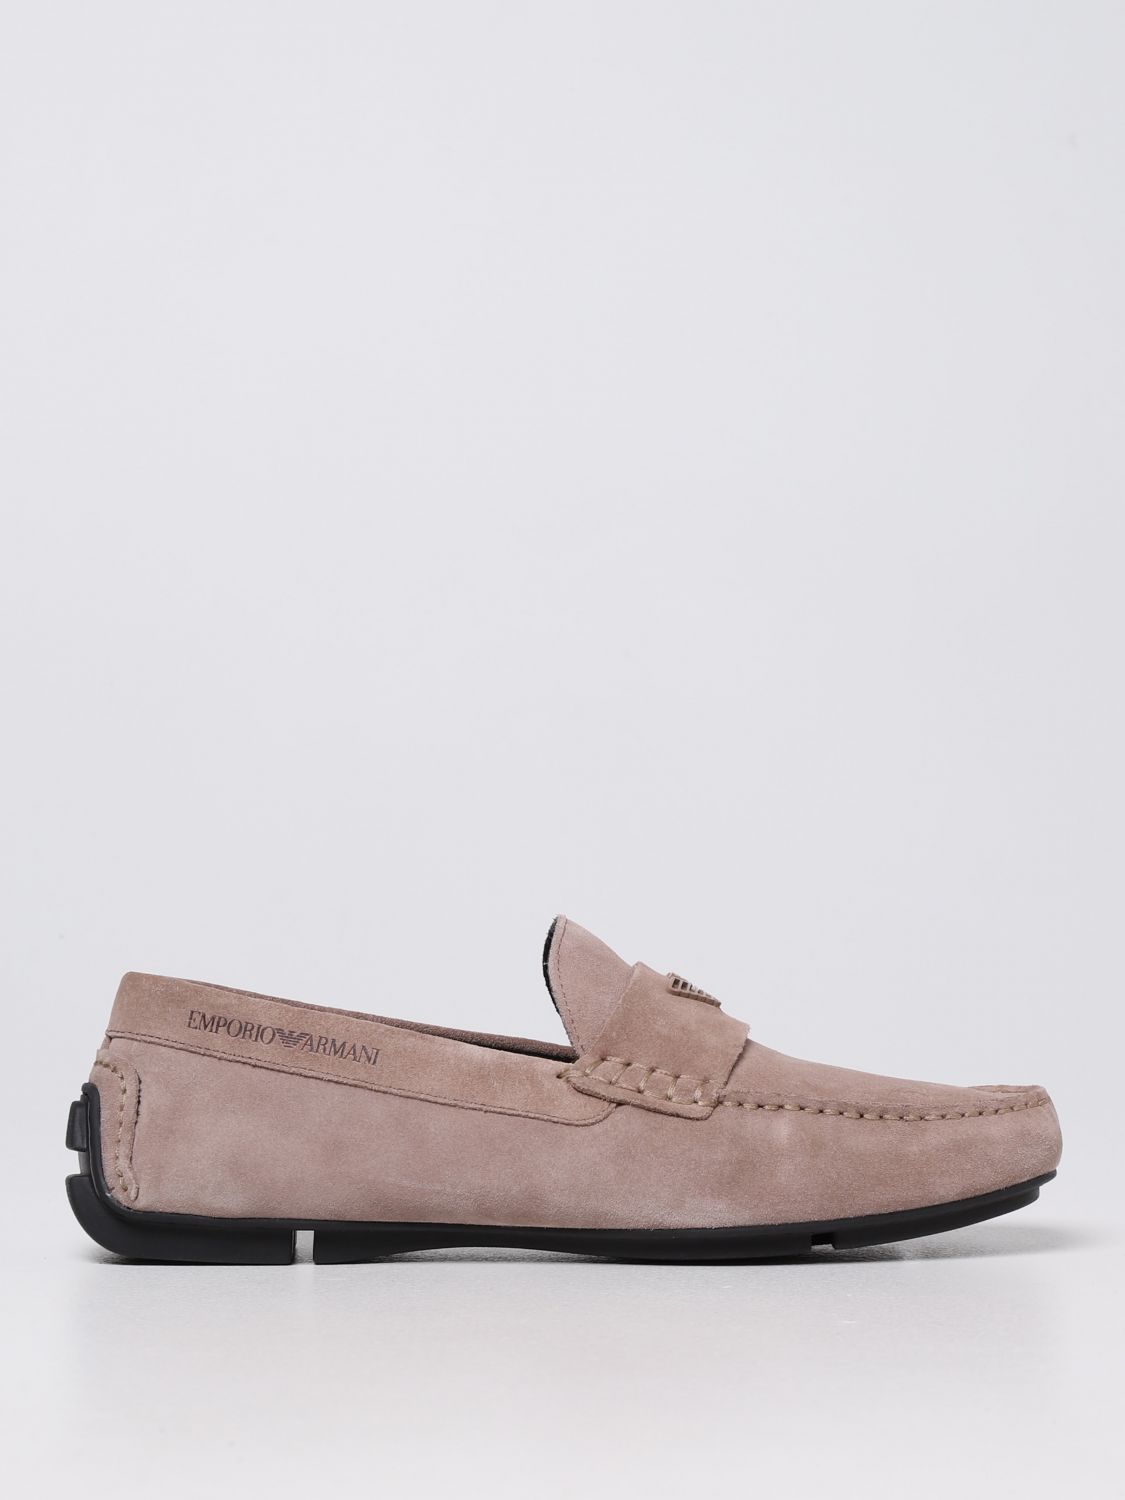 EMPORIO ARMANI: driver moccasin in suede - Beige | Emporio Armani loafers  X4B124XF188 online on 